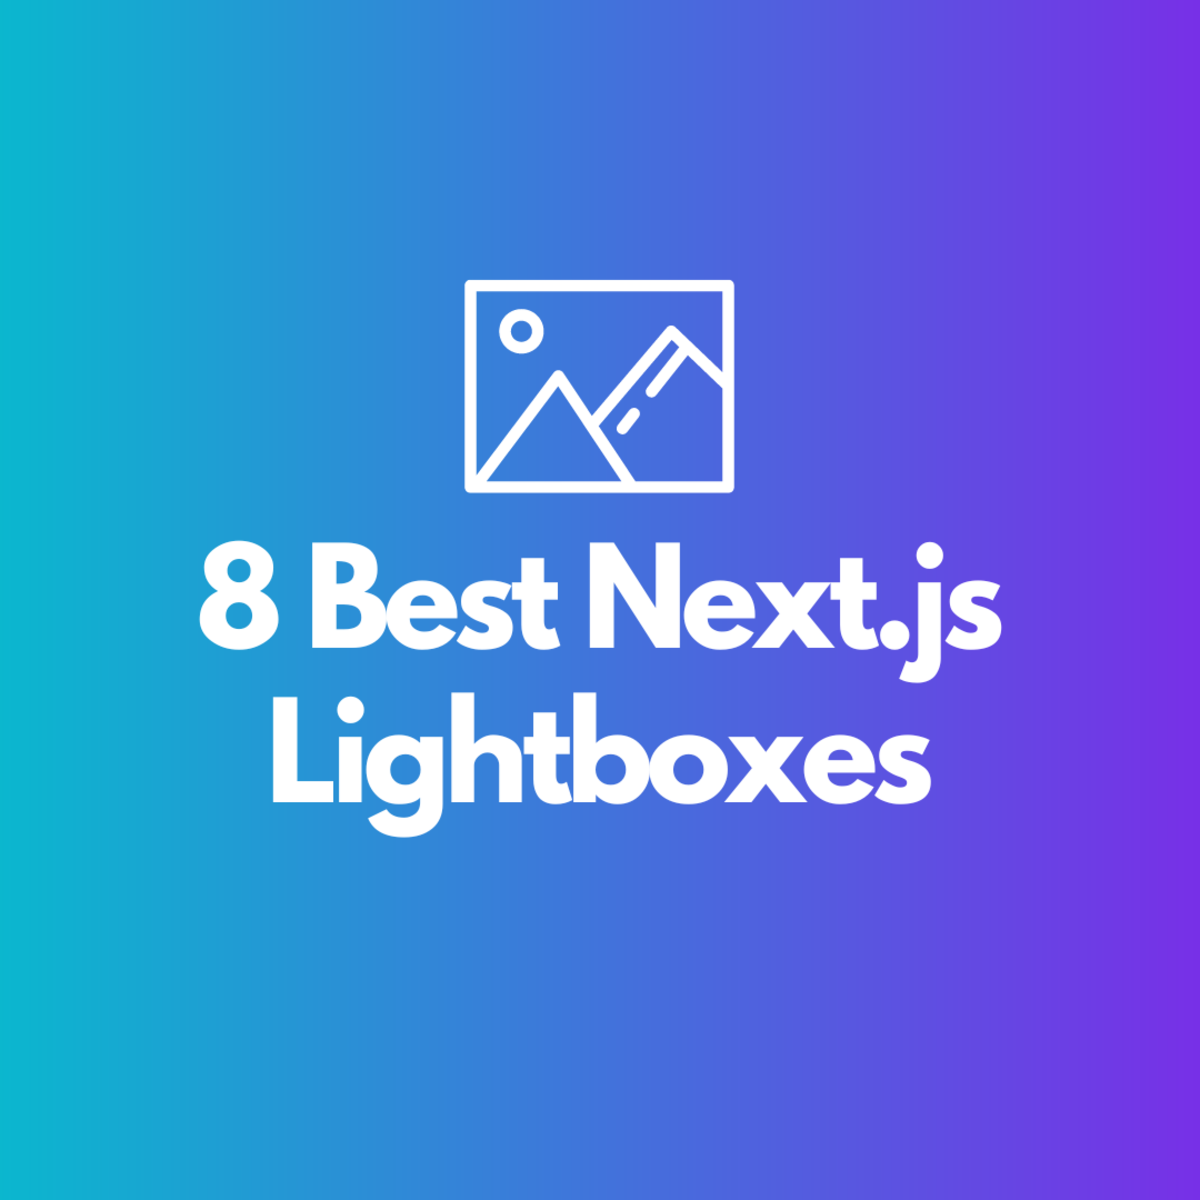 Discover the best Next.js lightboxes in this ultimate list!